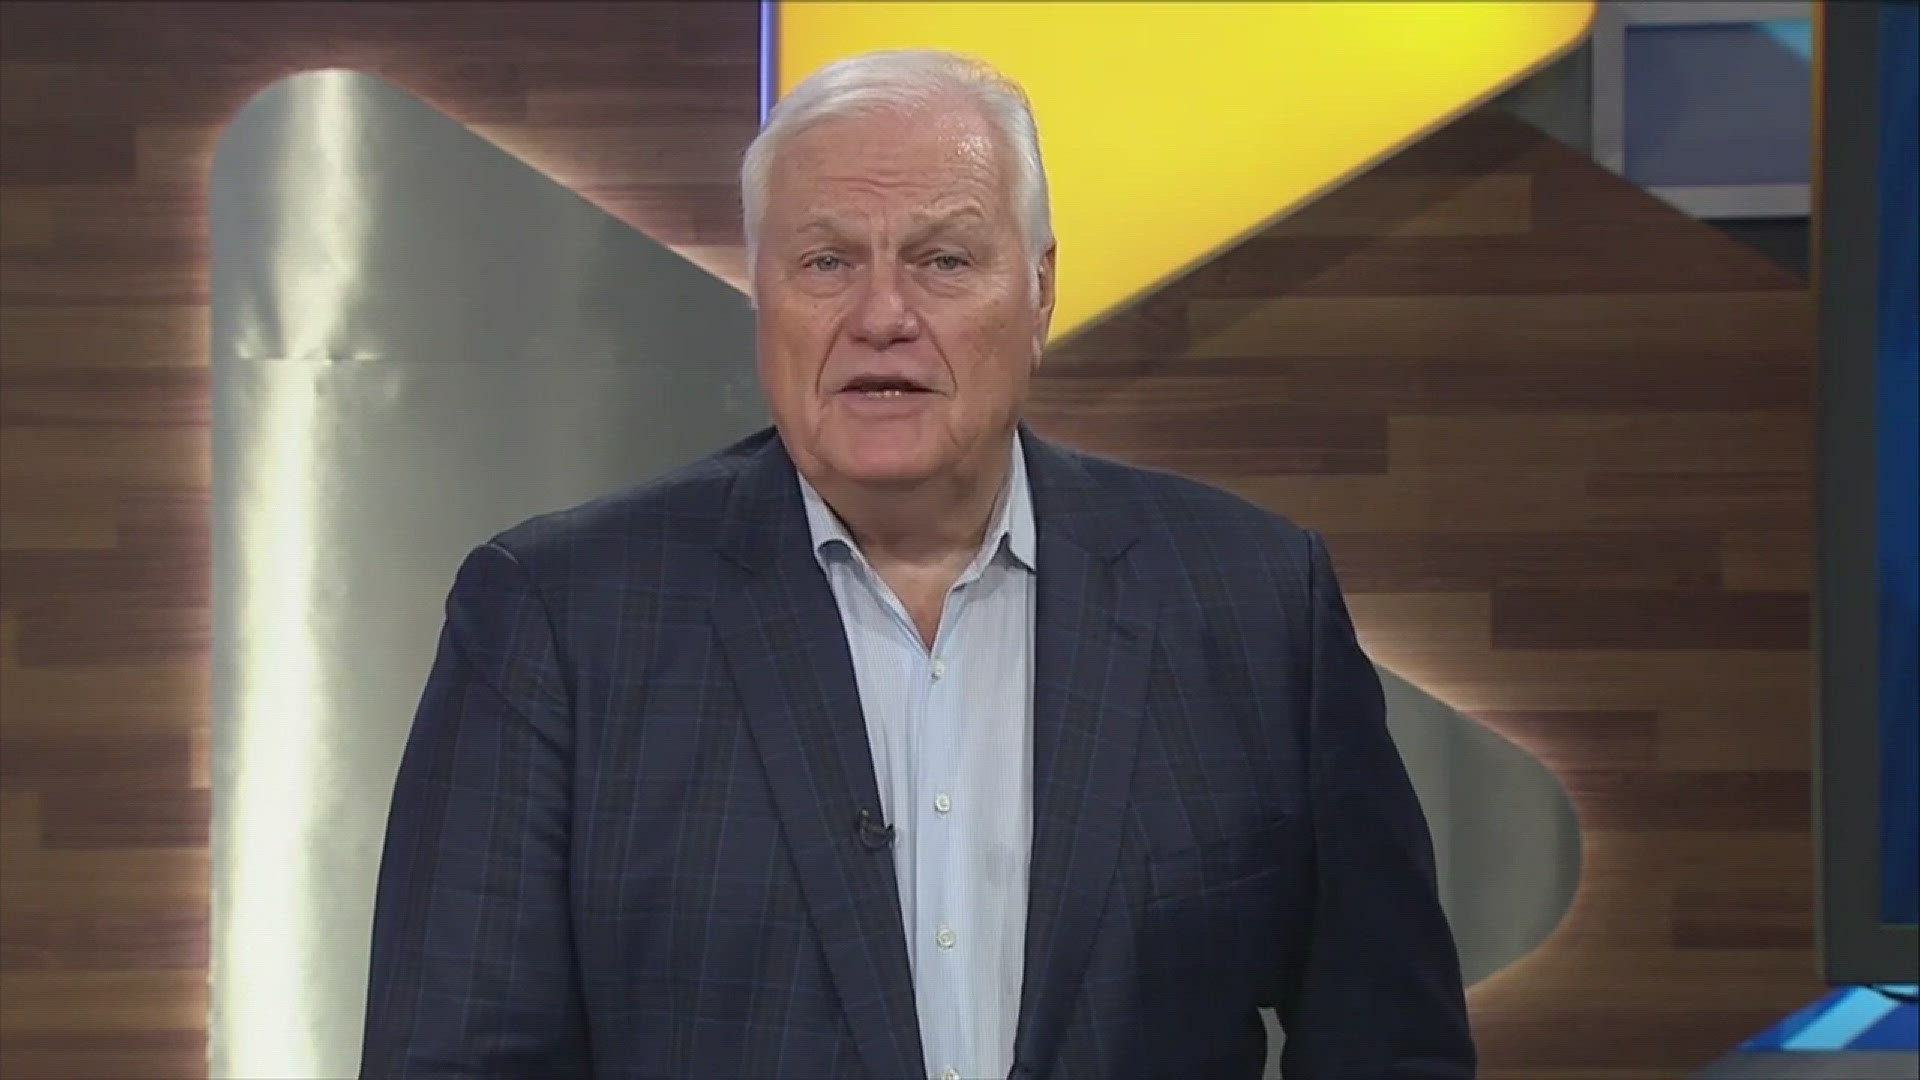 "That win over the Giants last night was an ugly football game again, but then a lot of 'em are anymore," - Dale Hansen.